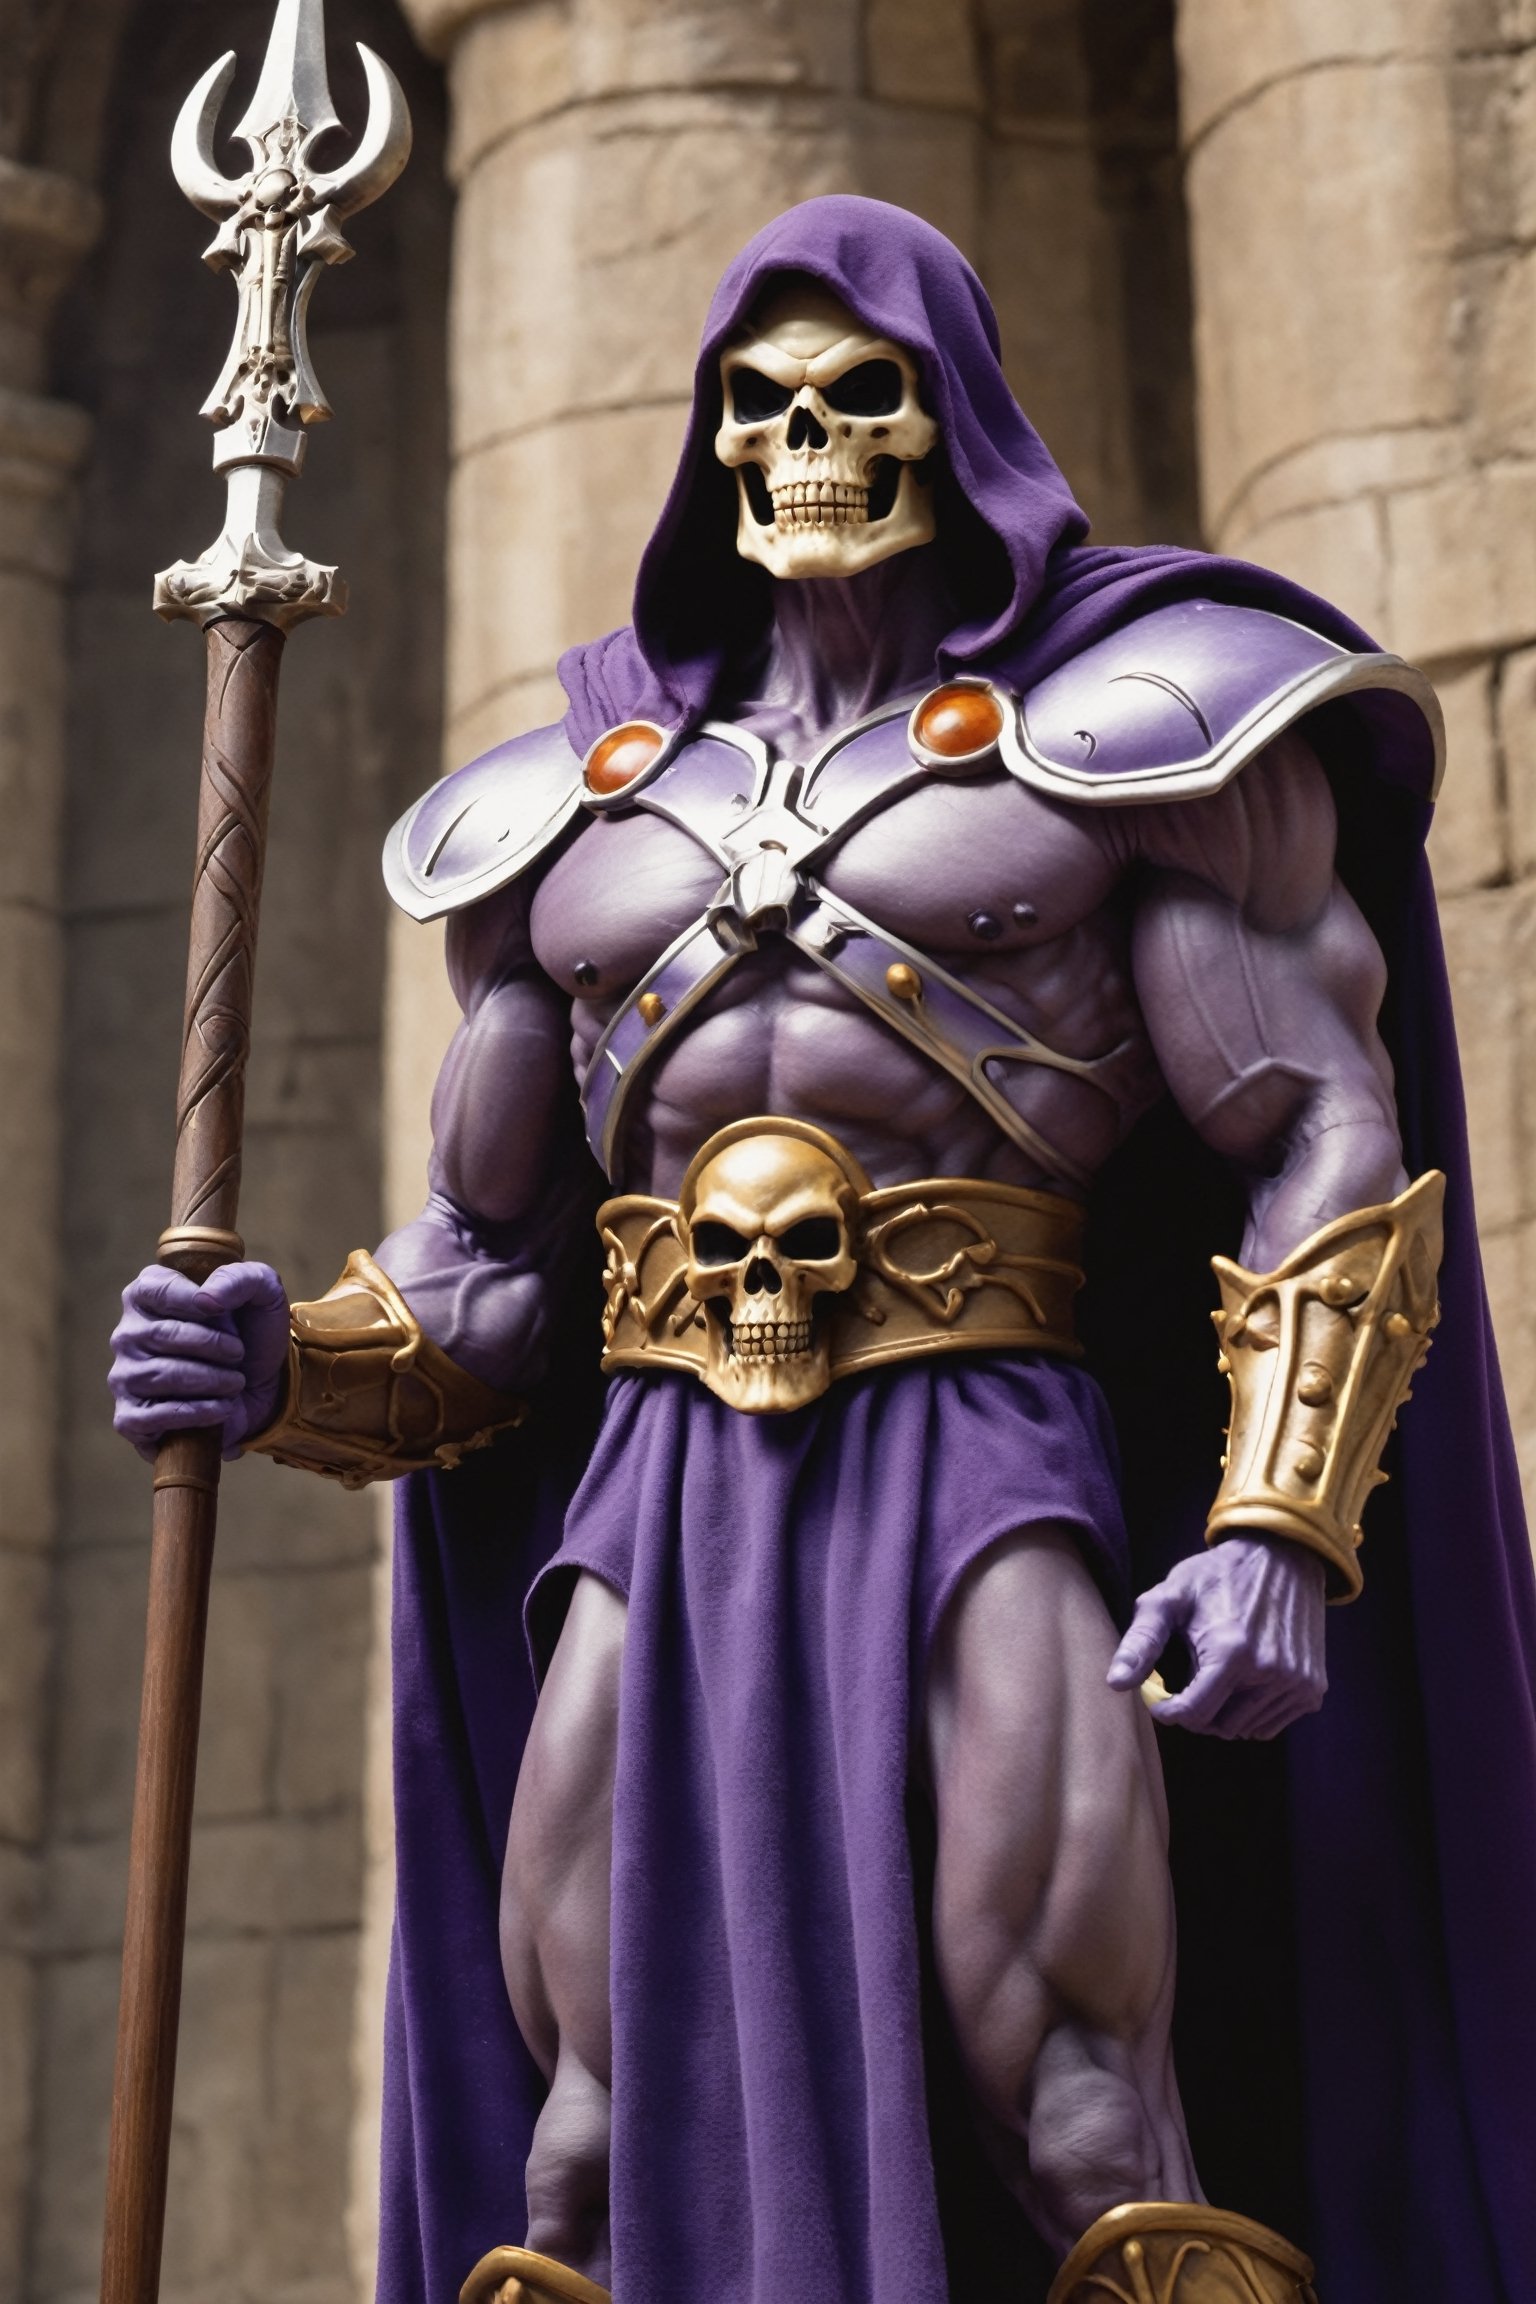 Skeletor, a menacing and skeletal figure, rules over the dark forces from within Castle Grayskull. His muscular frame is clad in dark, tattered robes, and his skull-like visage emanates an aura of malevolence. Skeletor wields a Havoc Staff, channeling dark energies to command the minions that serve his sinister purpose.